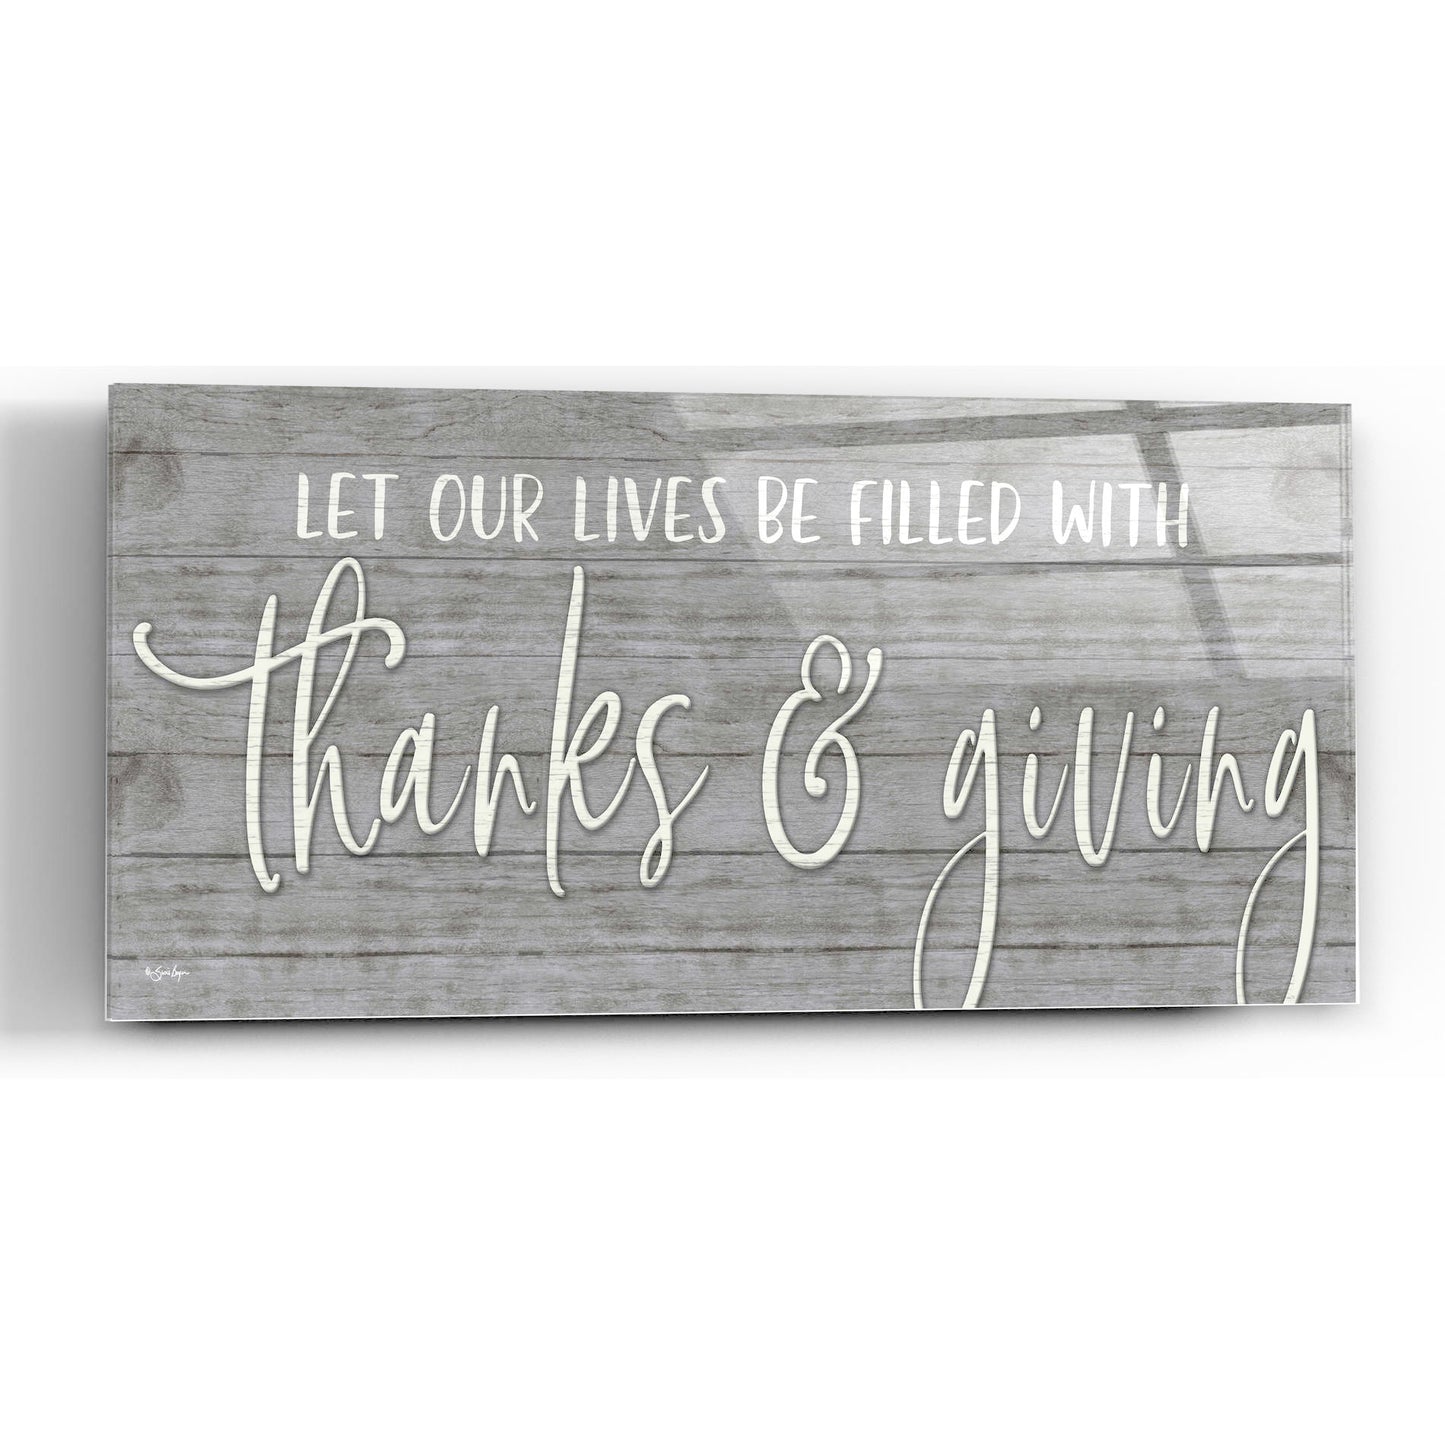 Epic Art 'Thanks & Giving' by Susie Boyer, Acrylic Glass Wall Art,36x12